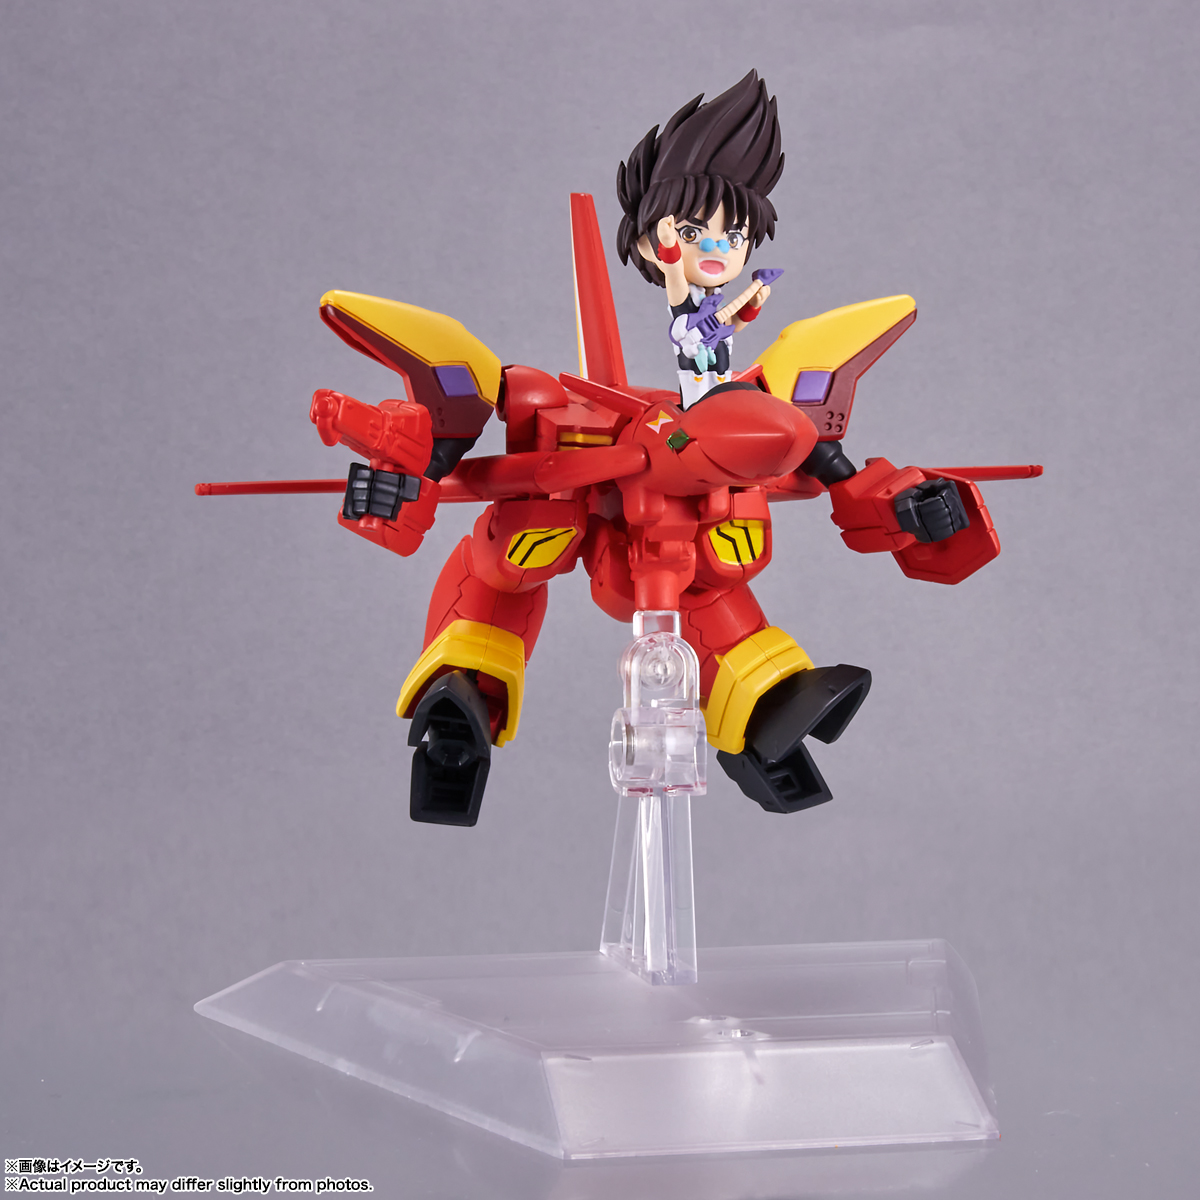 macross-7-vf-19-custom-fire-valkyrie-and-basara-nekki-tiny-session-action-figure-set image count 5